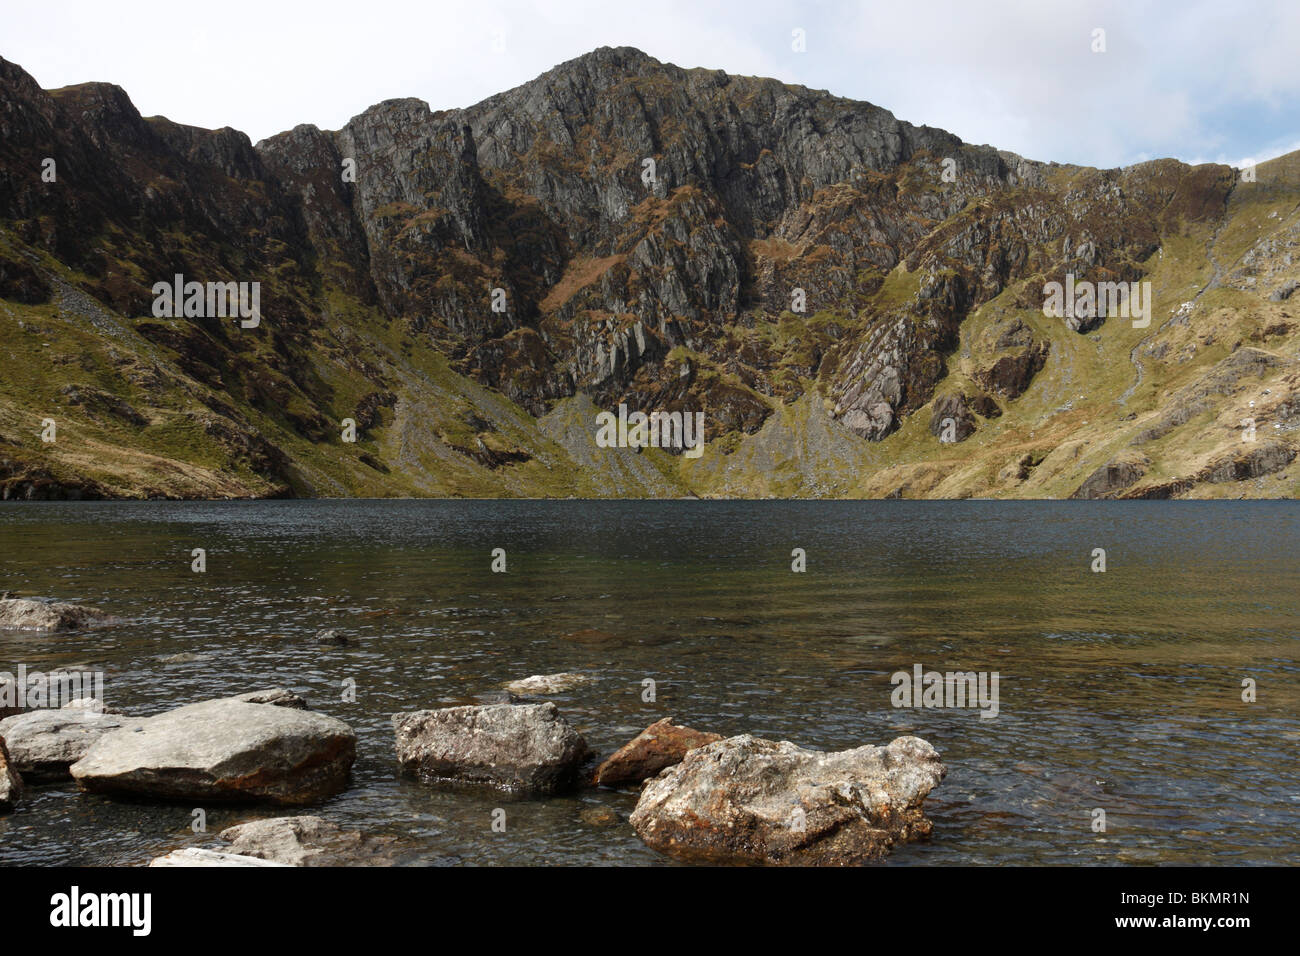 The lake of Llyn Cau nestled beneath the great cliffs of Craig Cau on the mountain of Cadair Idris in Snowdonia, North Wales Stock Photo